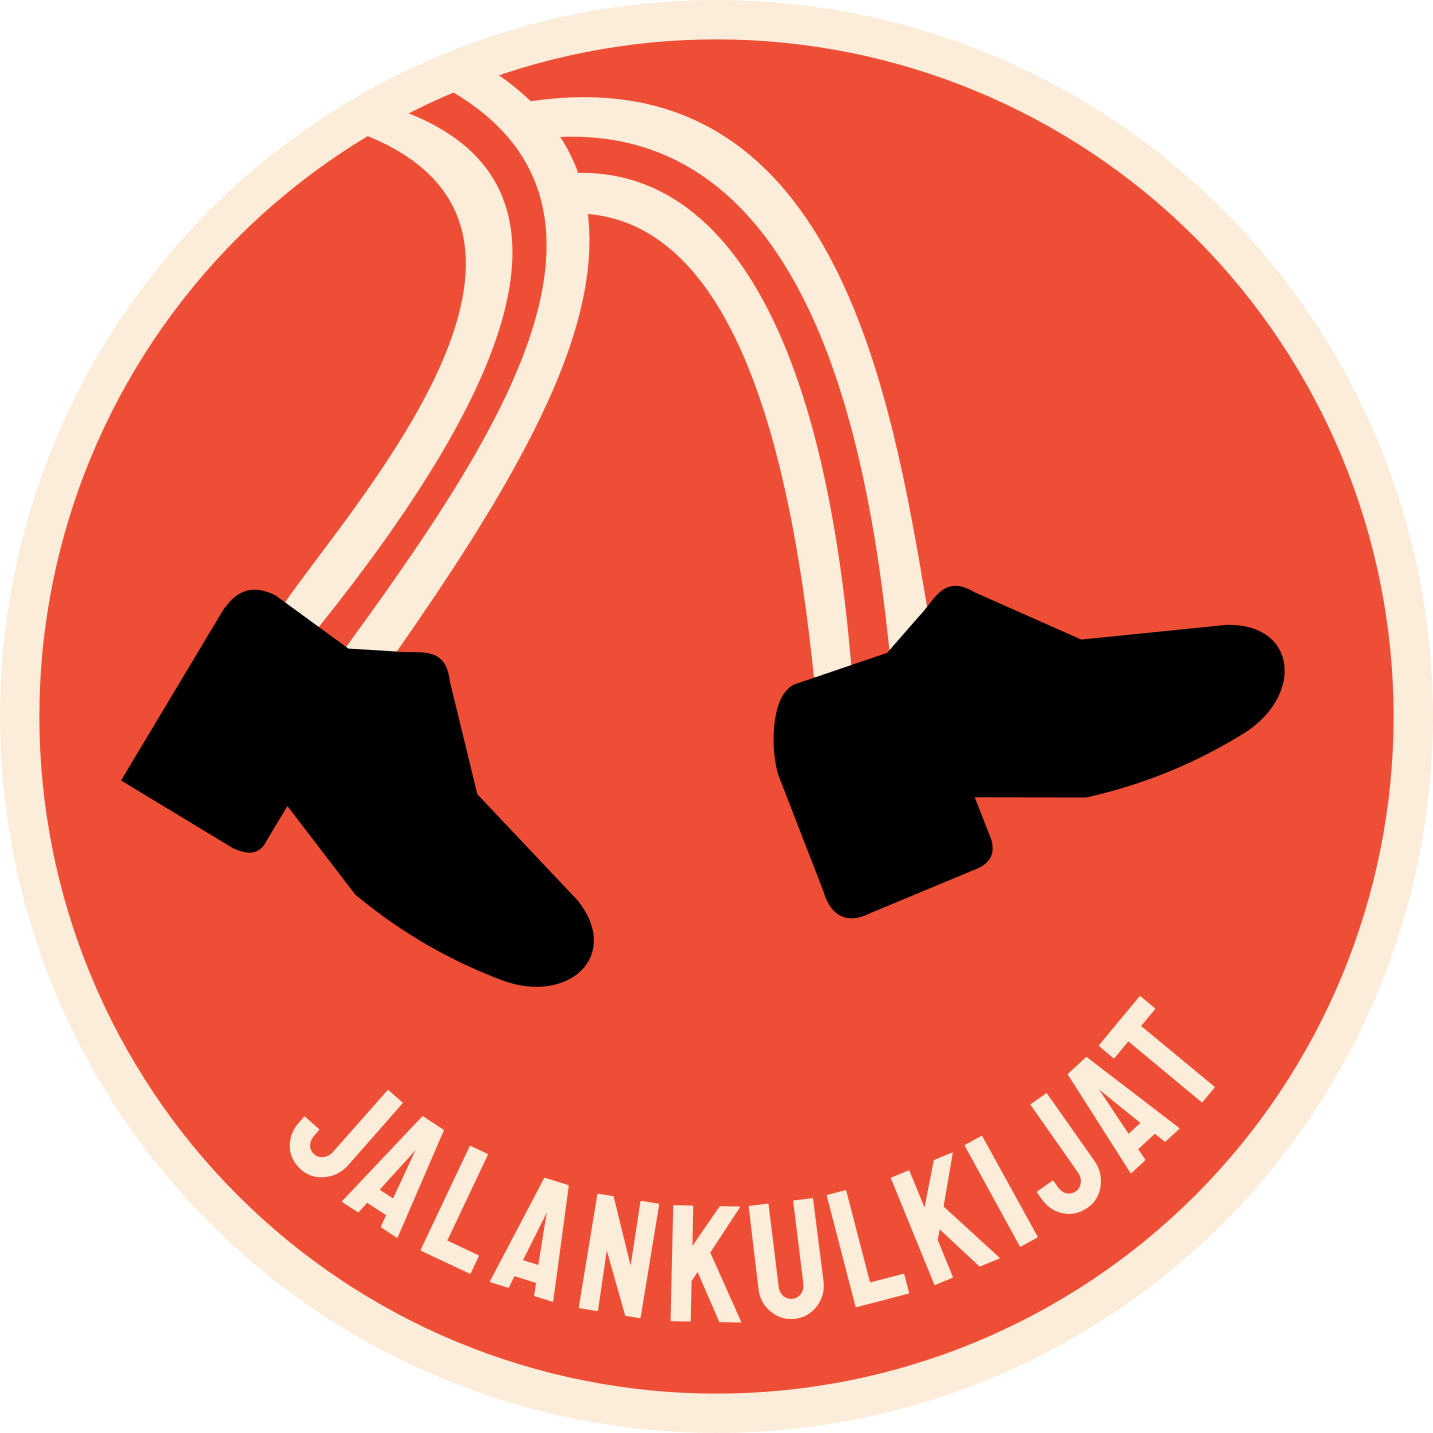 Helsinki Pedestrians' logo. A circle filled with red that has a cream-colored outline. Walking, cartoon legs come down from upper left. Inside the circle along the lower rim there is a text 'Jalankulkijat', which means pedestrians in Finnish.